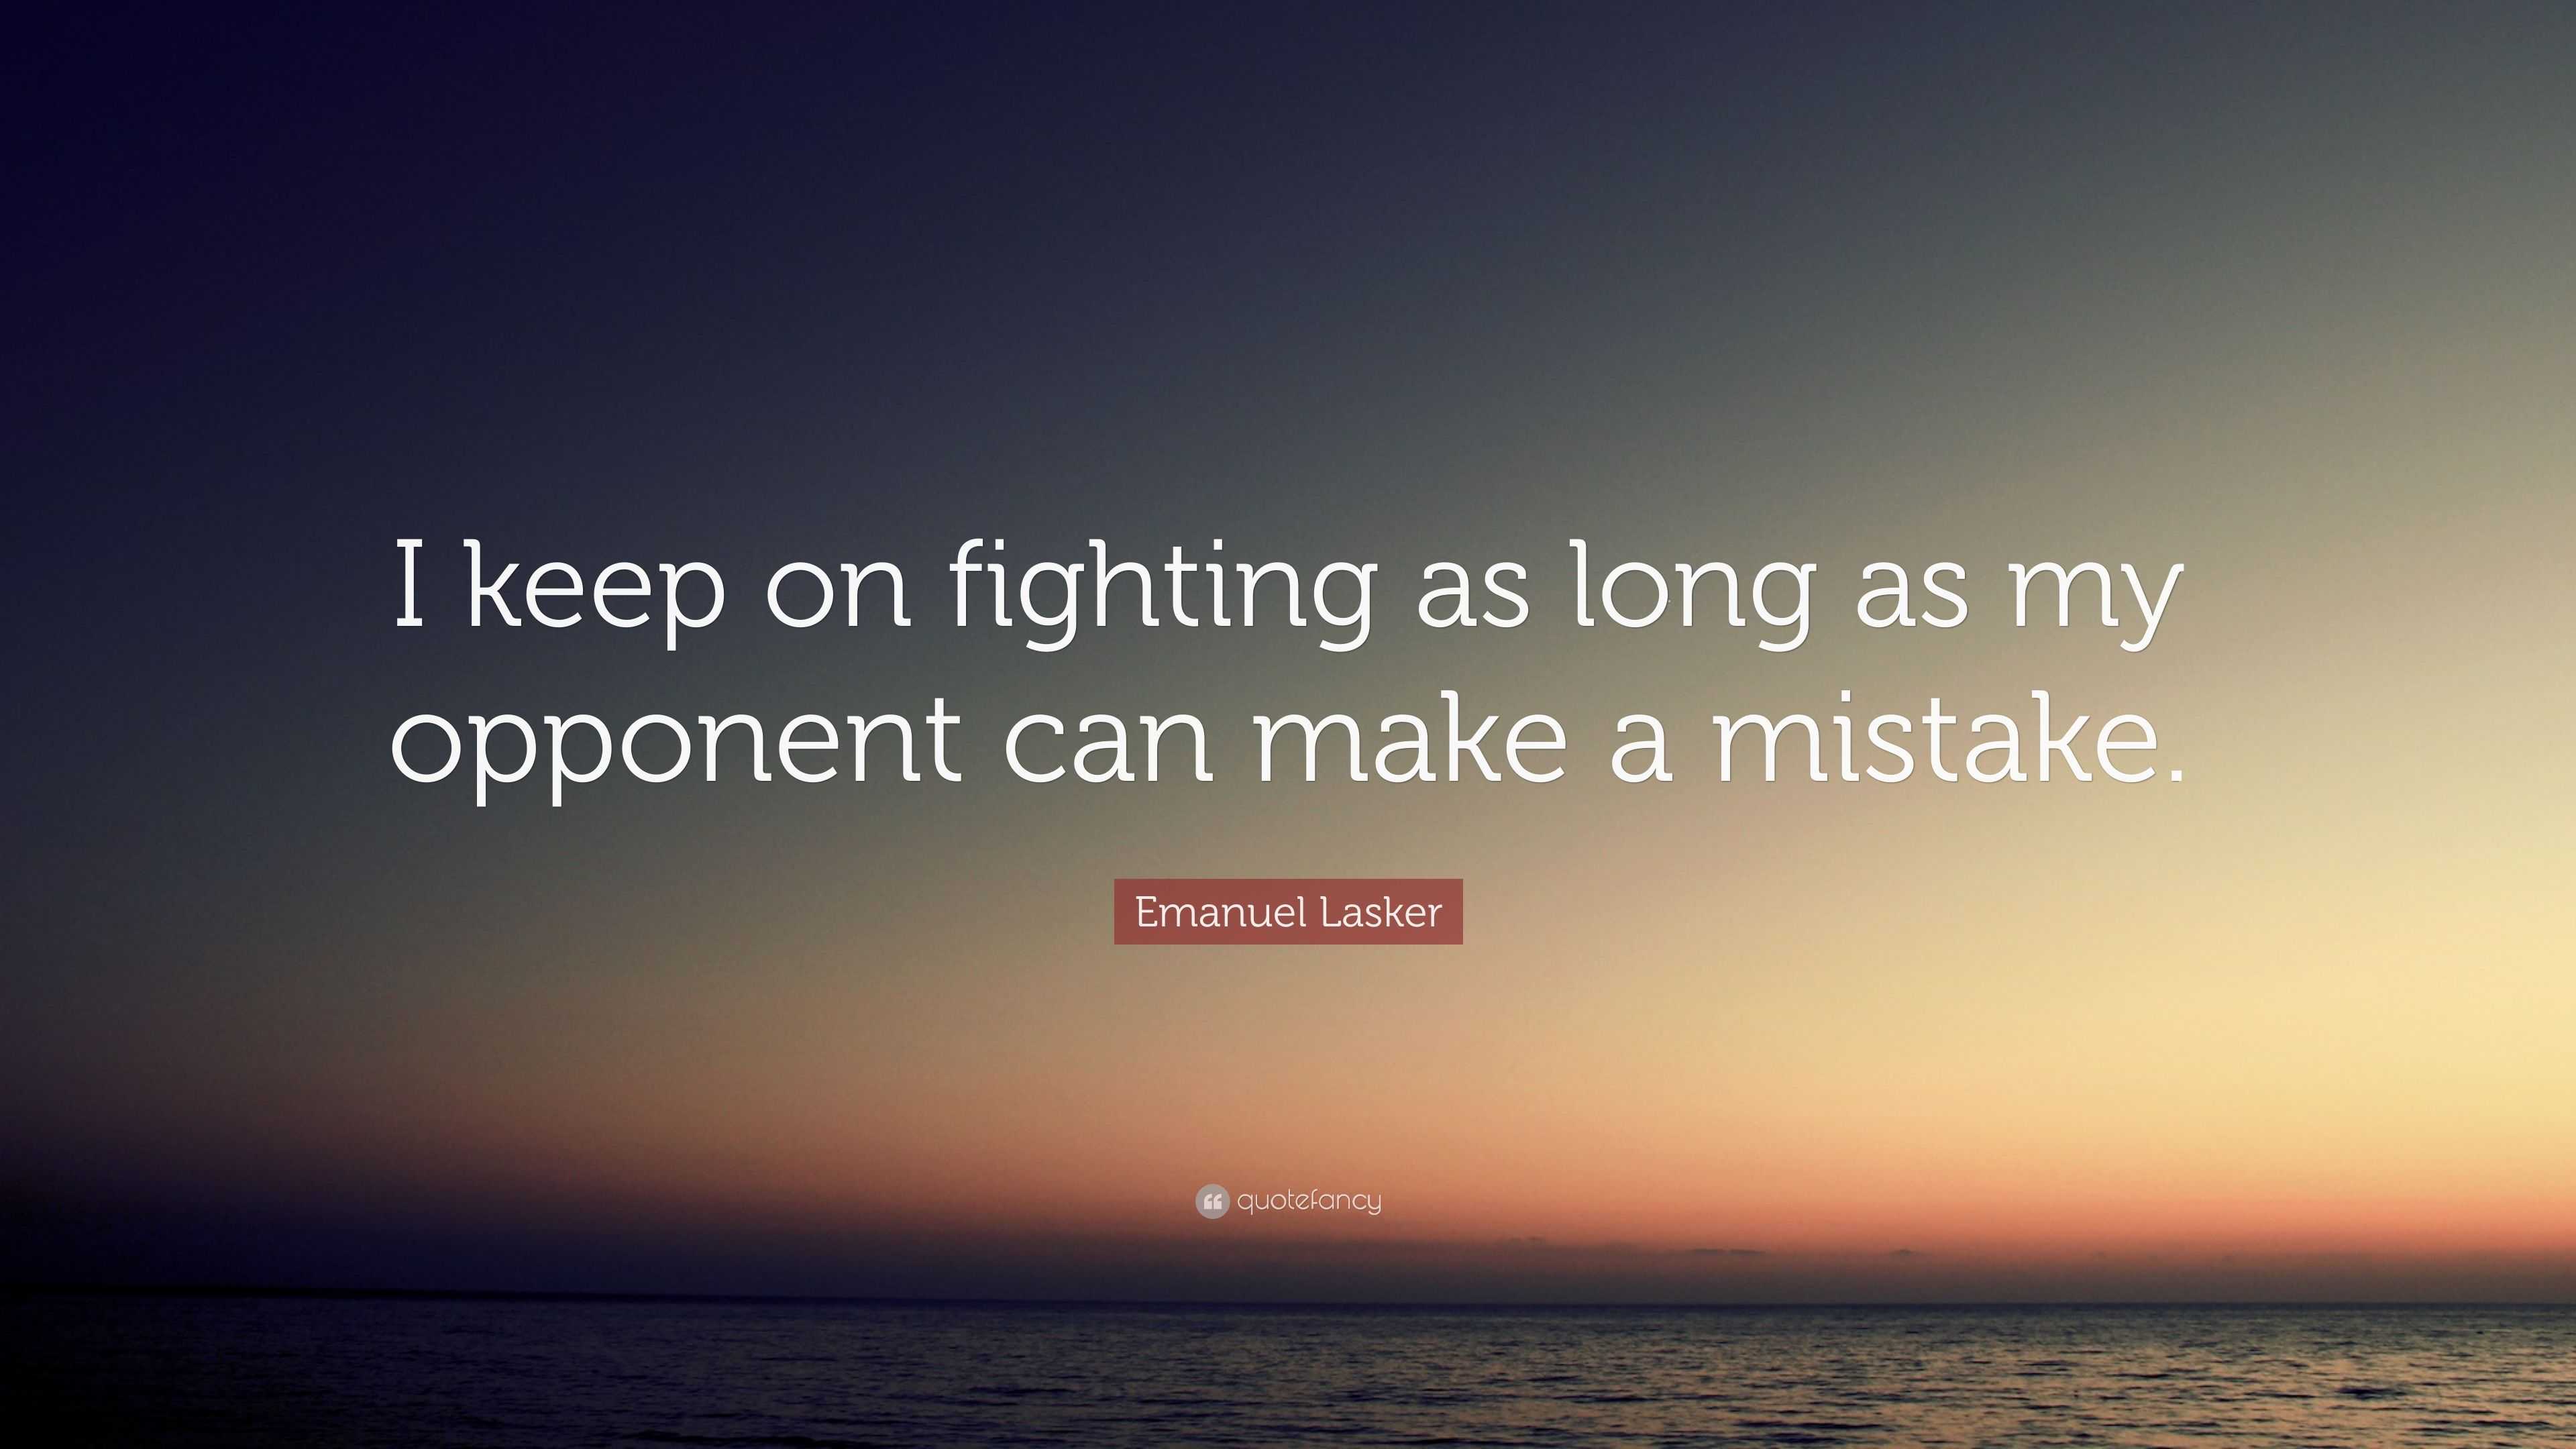 Emanuel Lasker Quote: “I keep on fighting as long as my opponent can ...